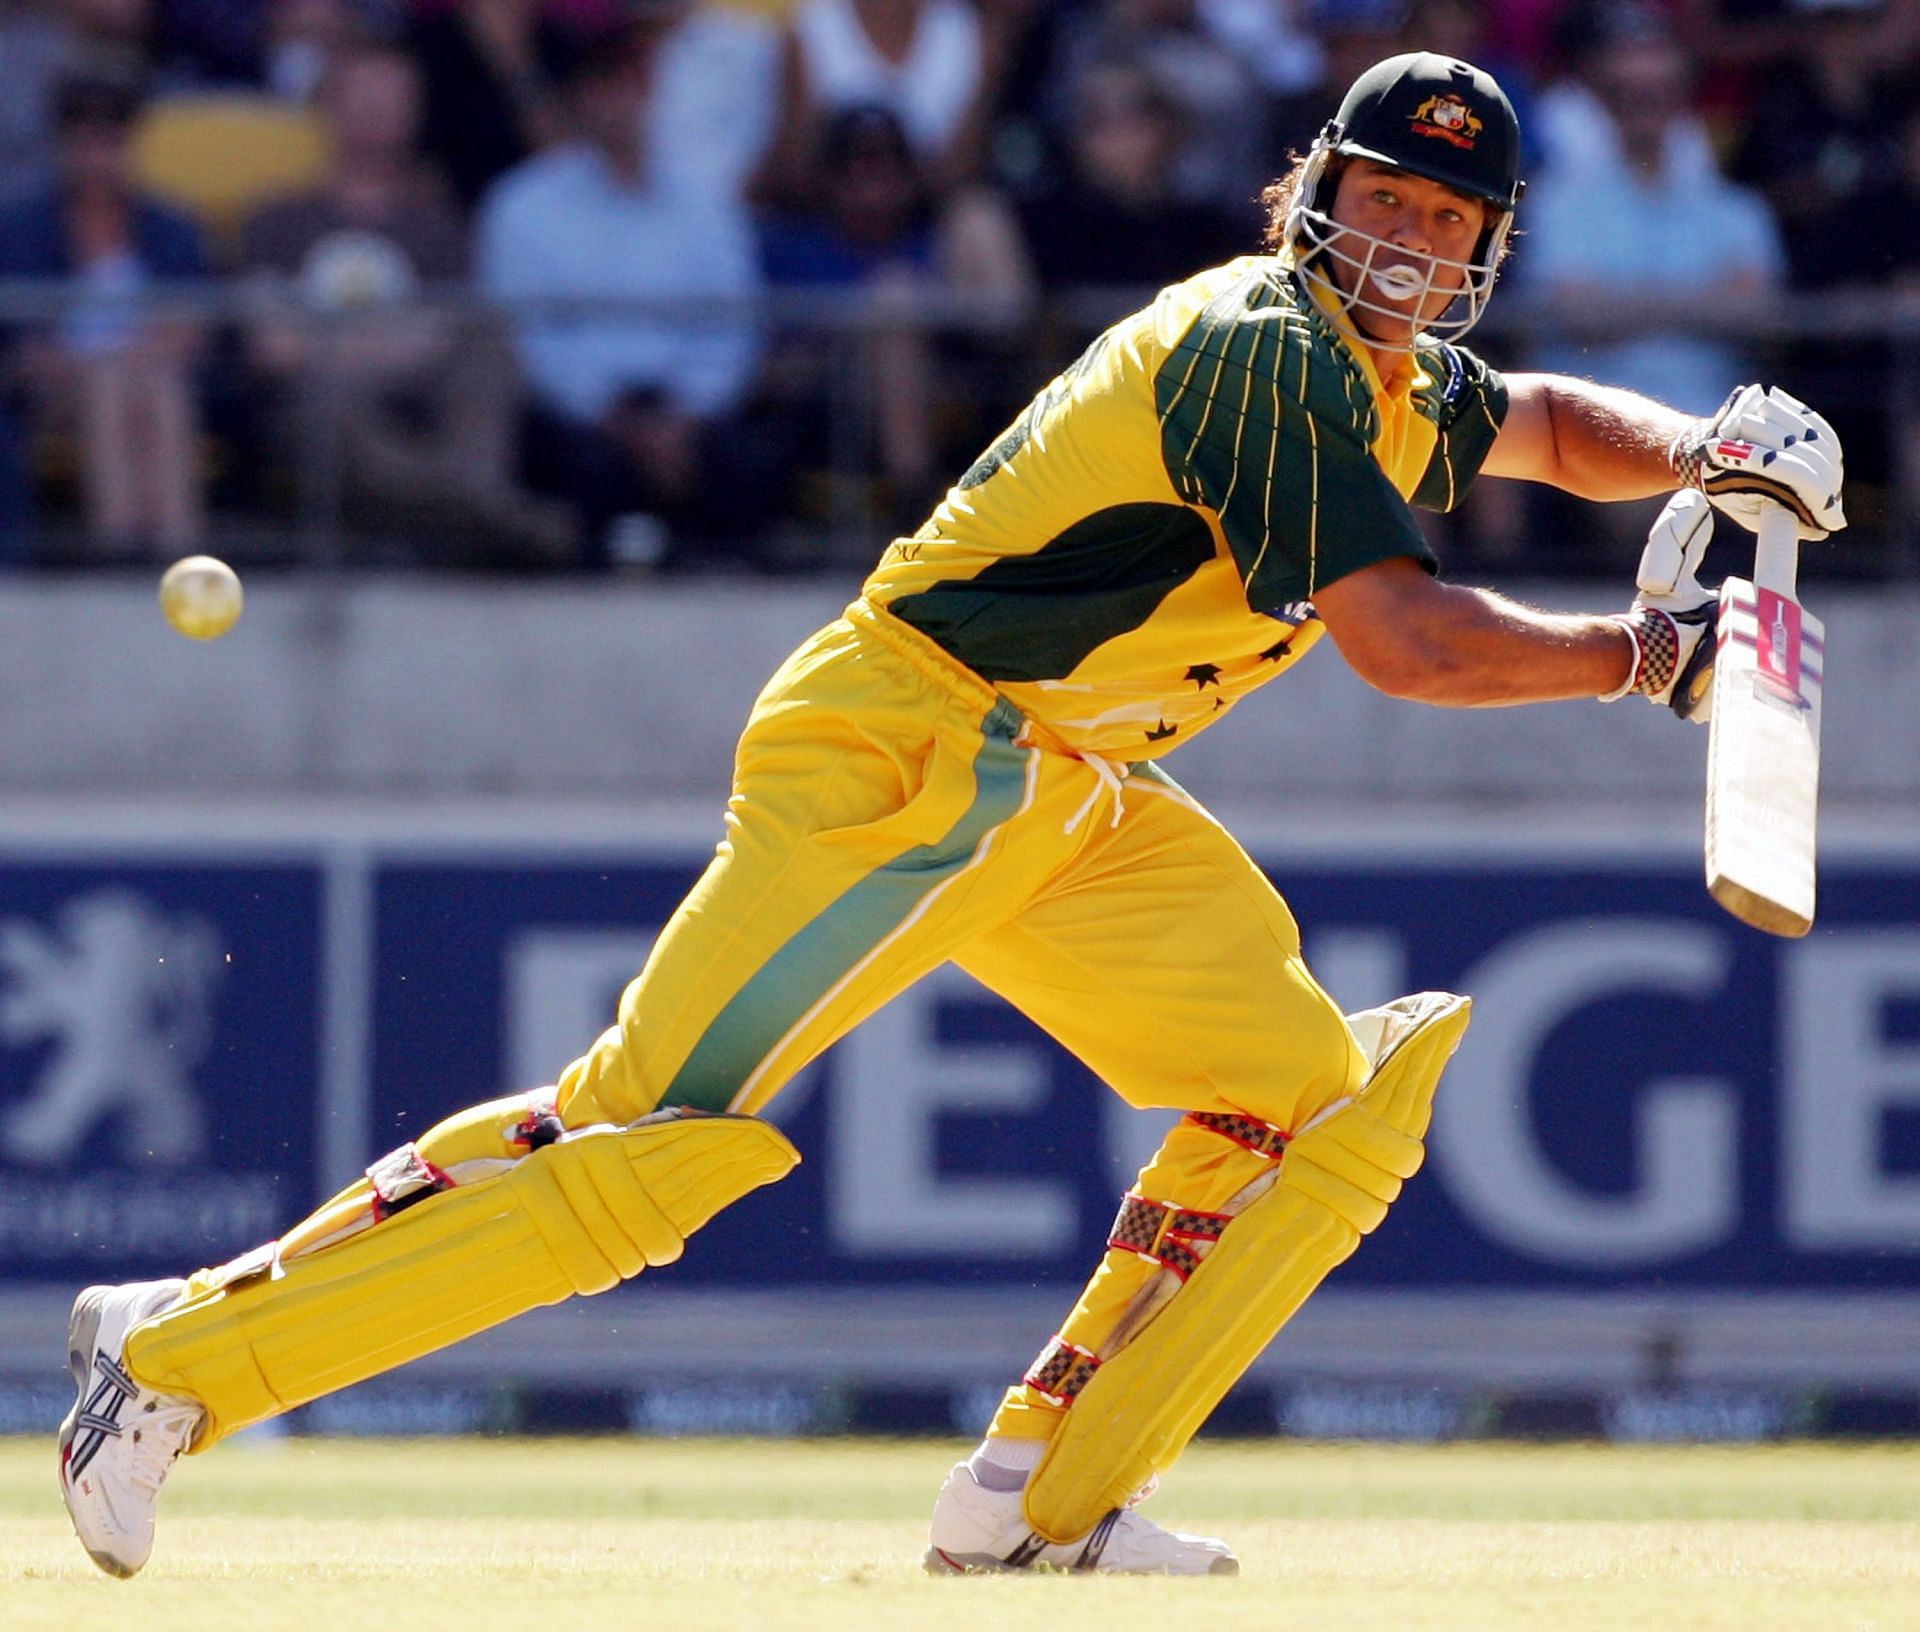 Andrew Symonds played a match winning knock against New Zealand